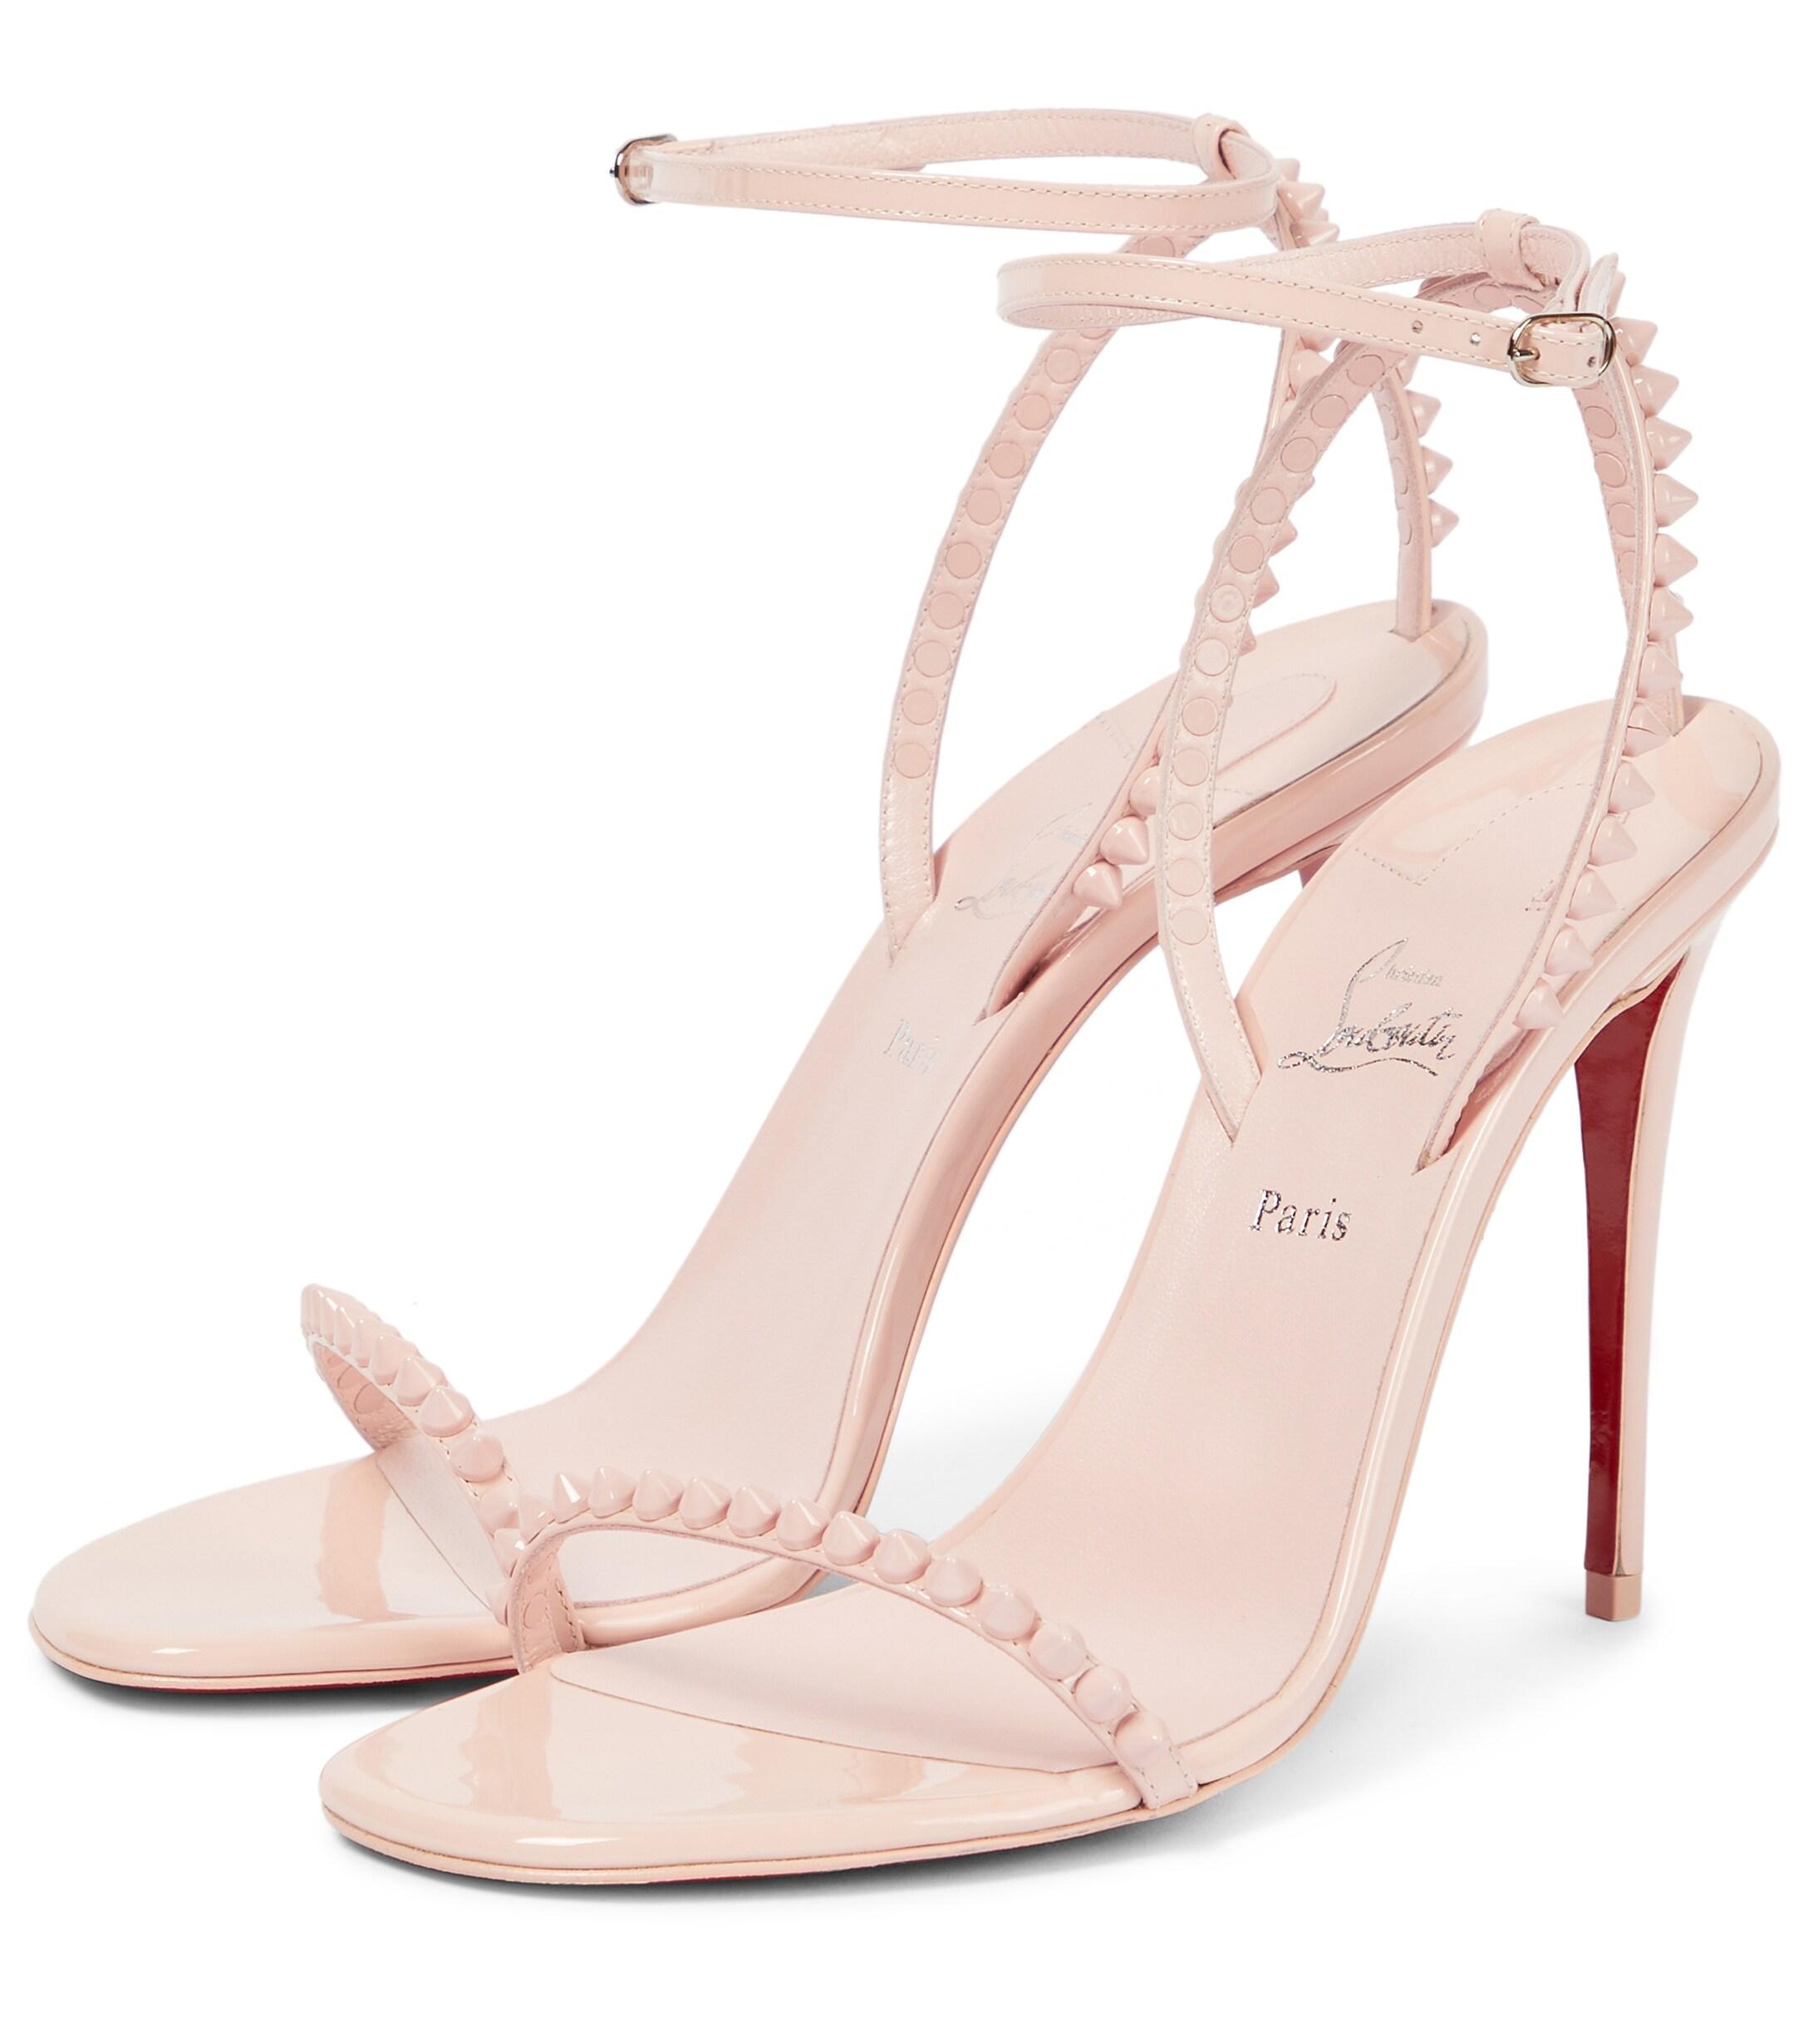 So Me 100 Embellished Leather Sandals in Pink - Christian